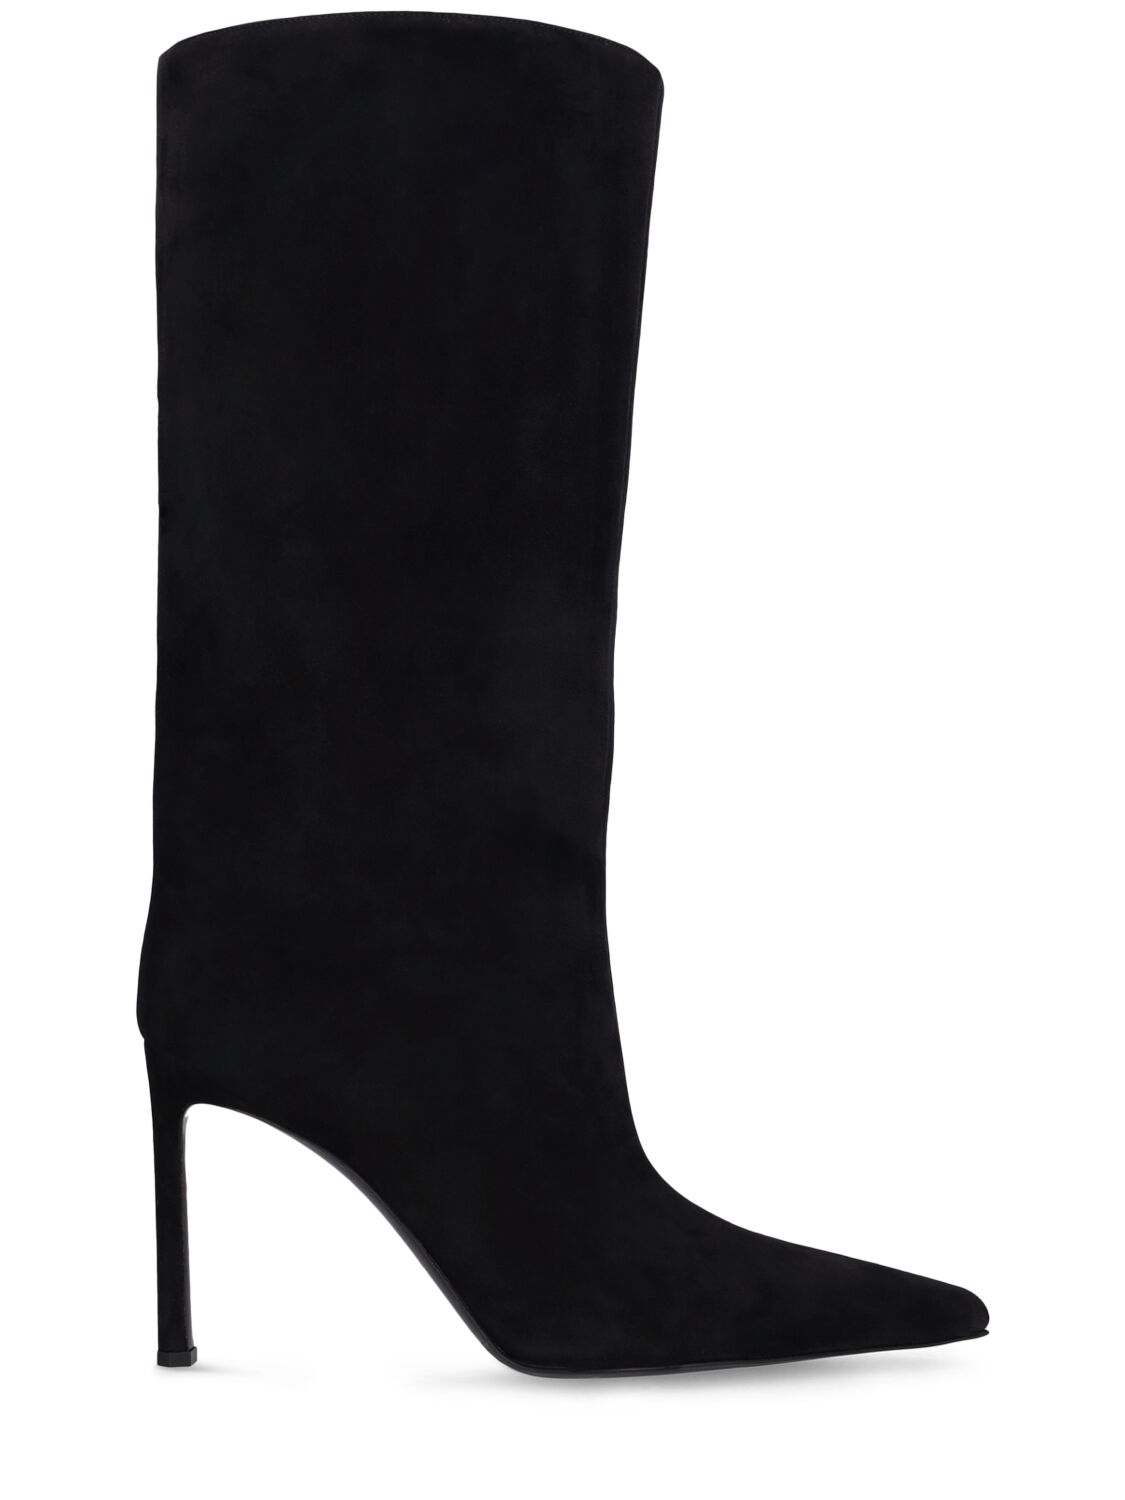 SERGIO ROSSI 95MM LIYA SUEDE TALL BOOTS